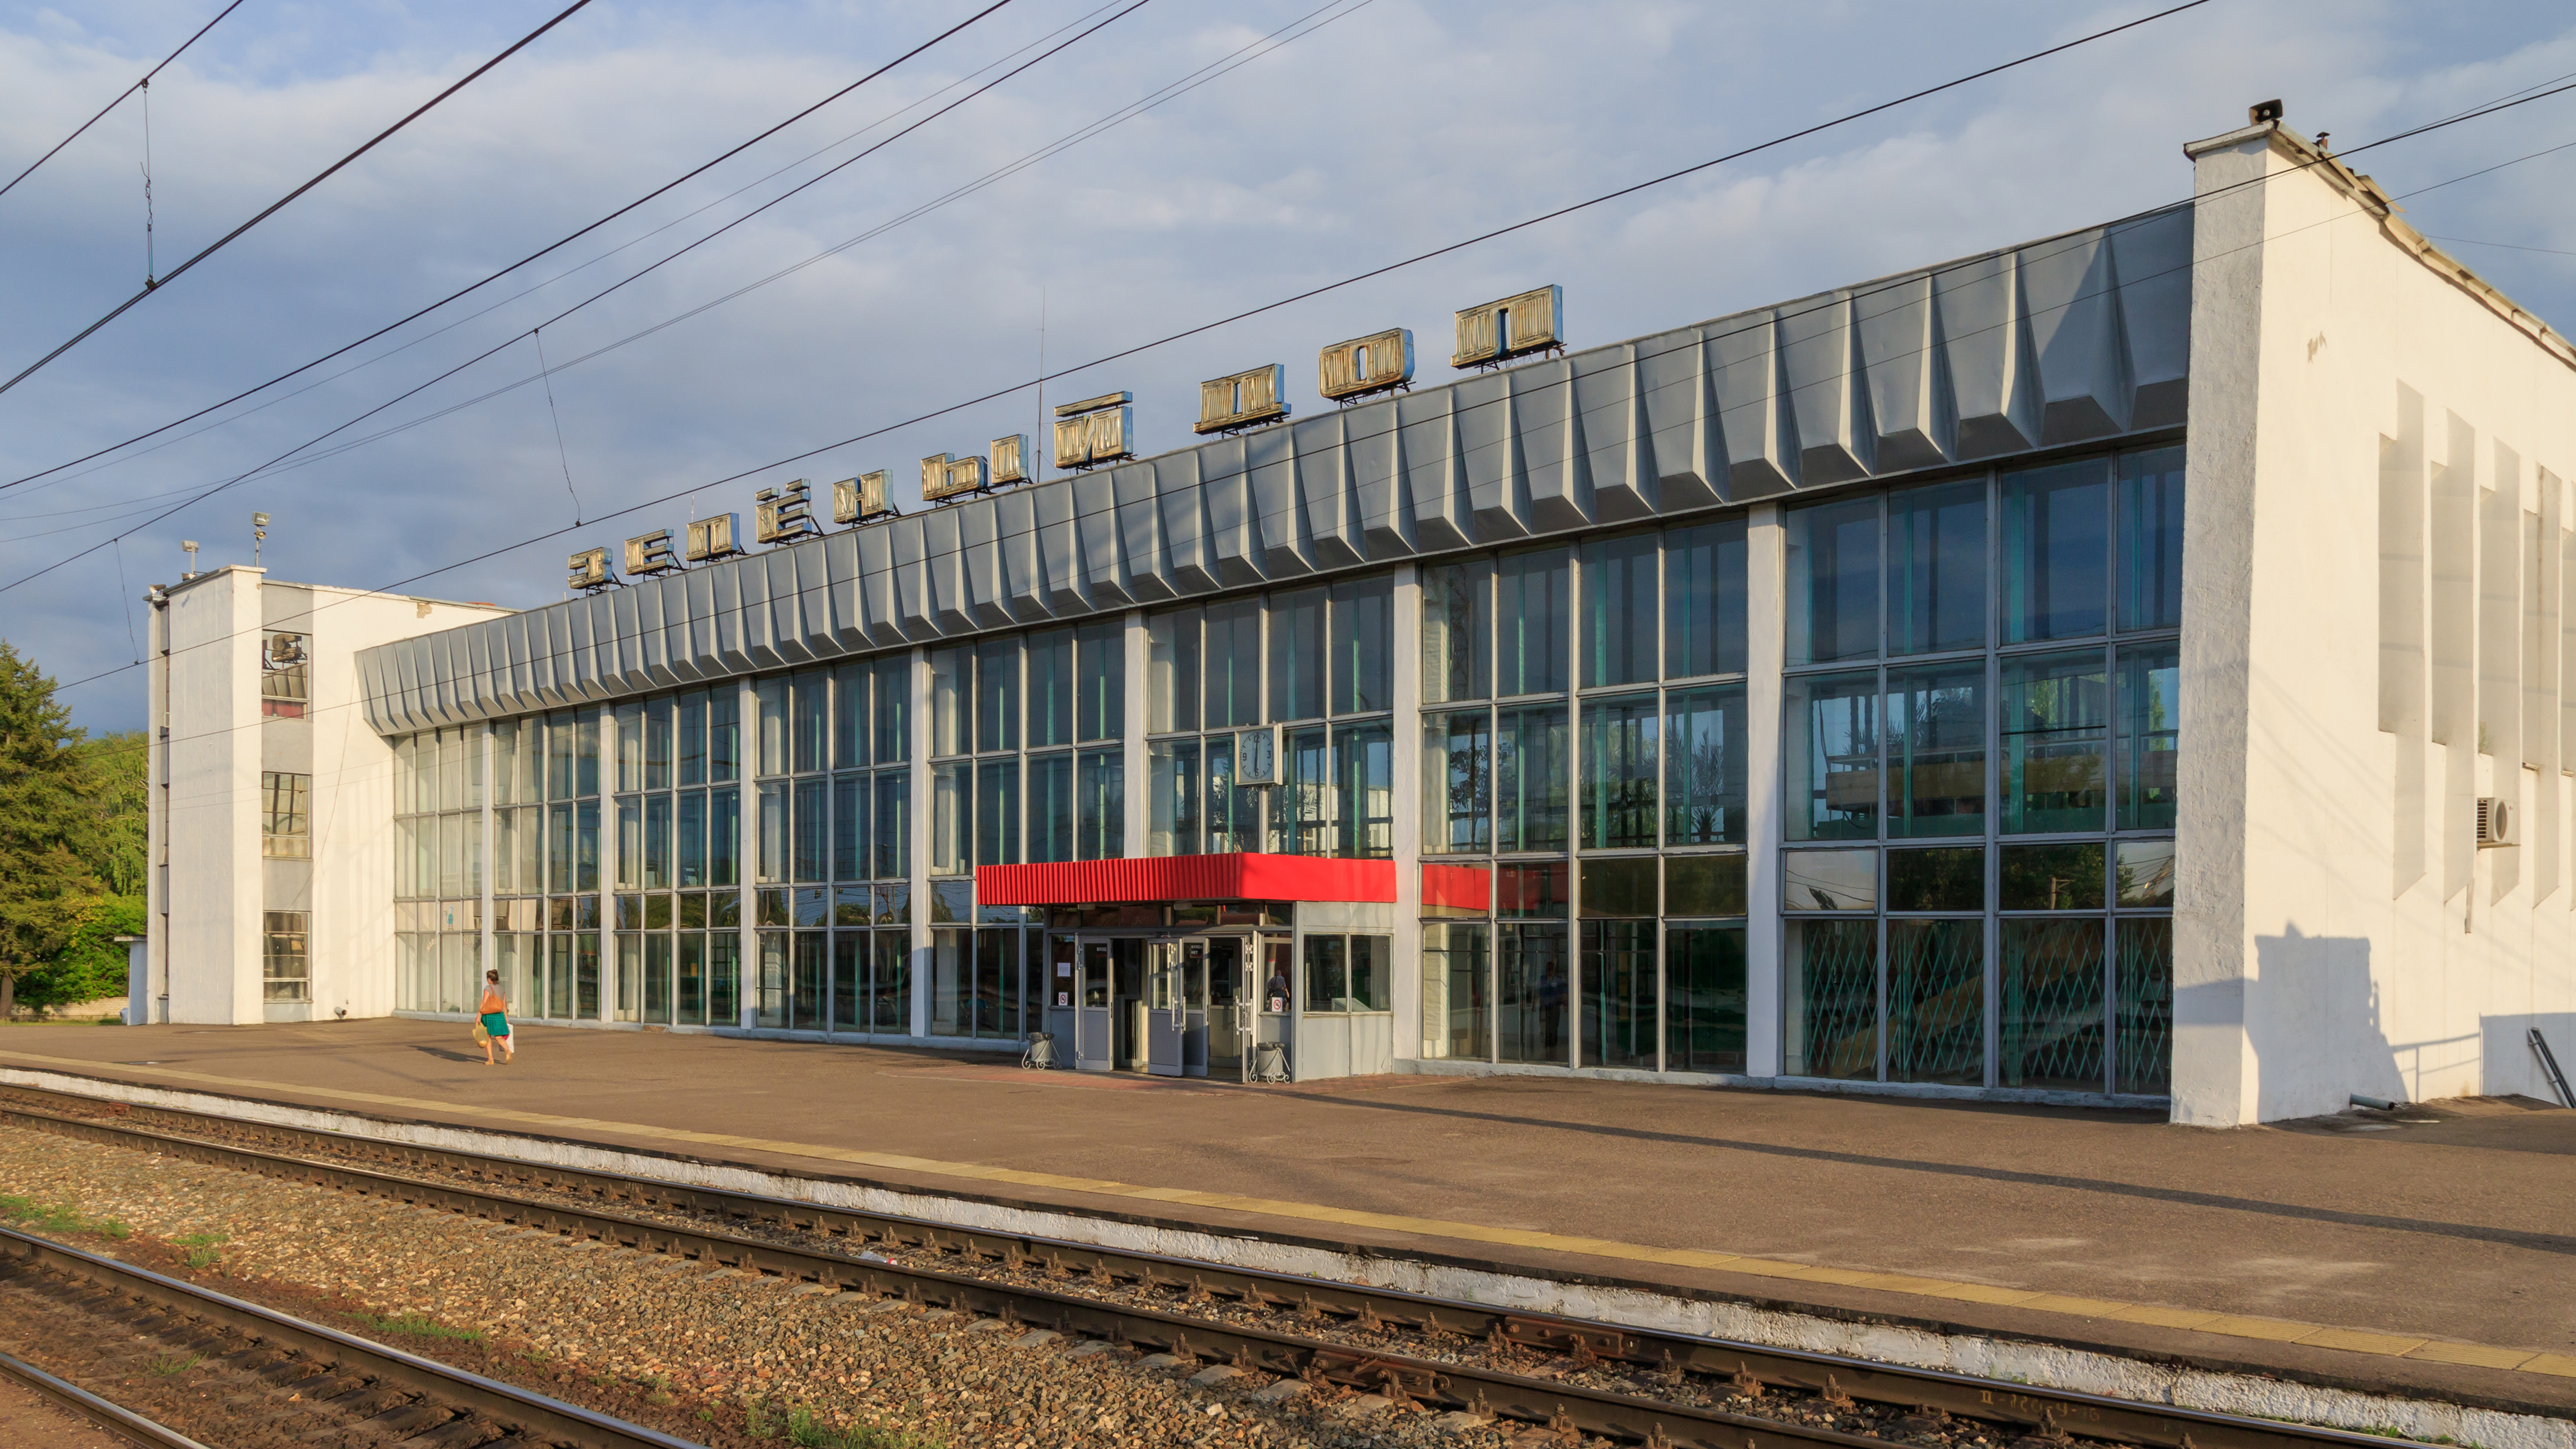 Zeleny Dol Station and surroundings 08-2016 img9